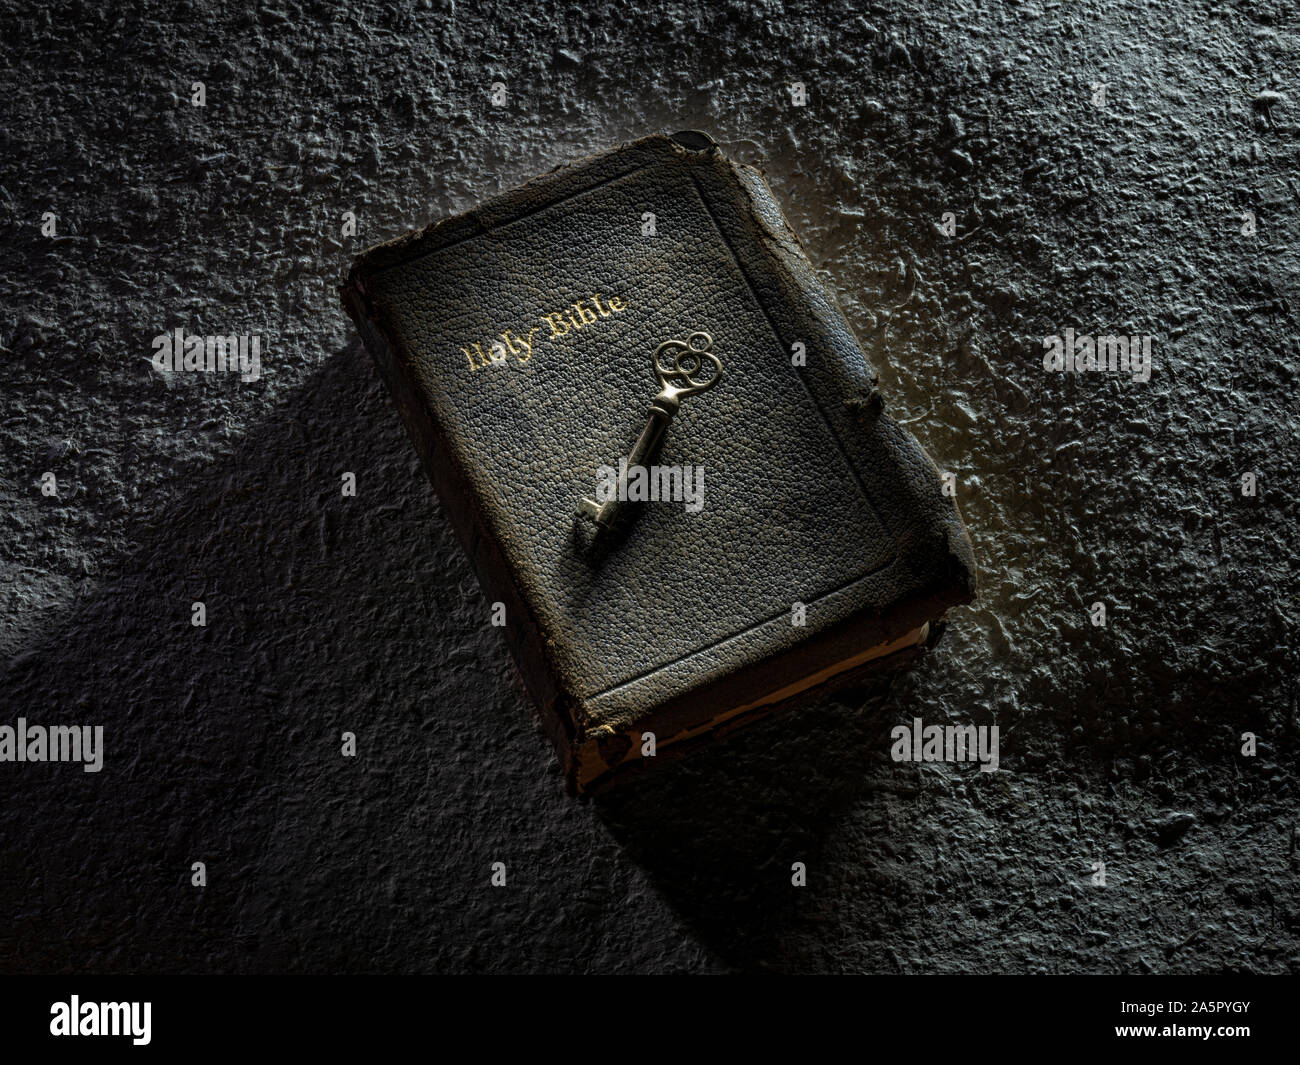 Key On Top Of Open Holy Bible Stock Photo